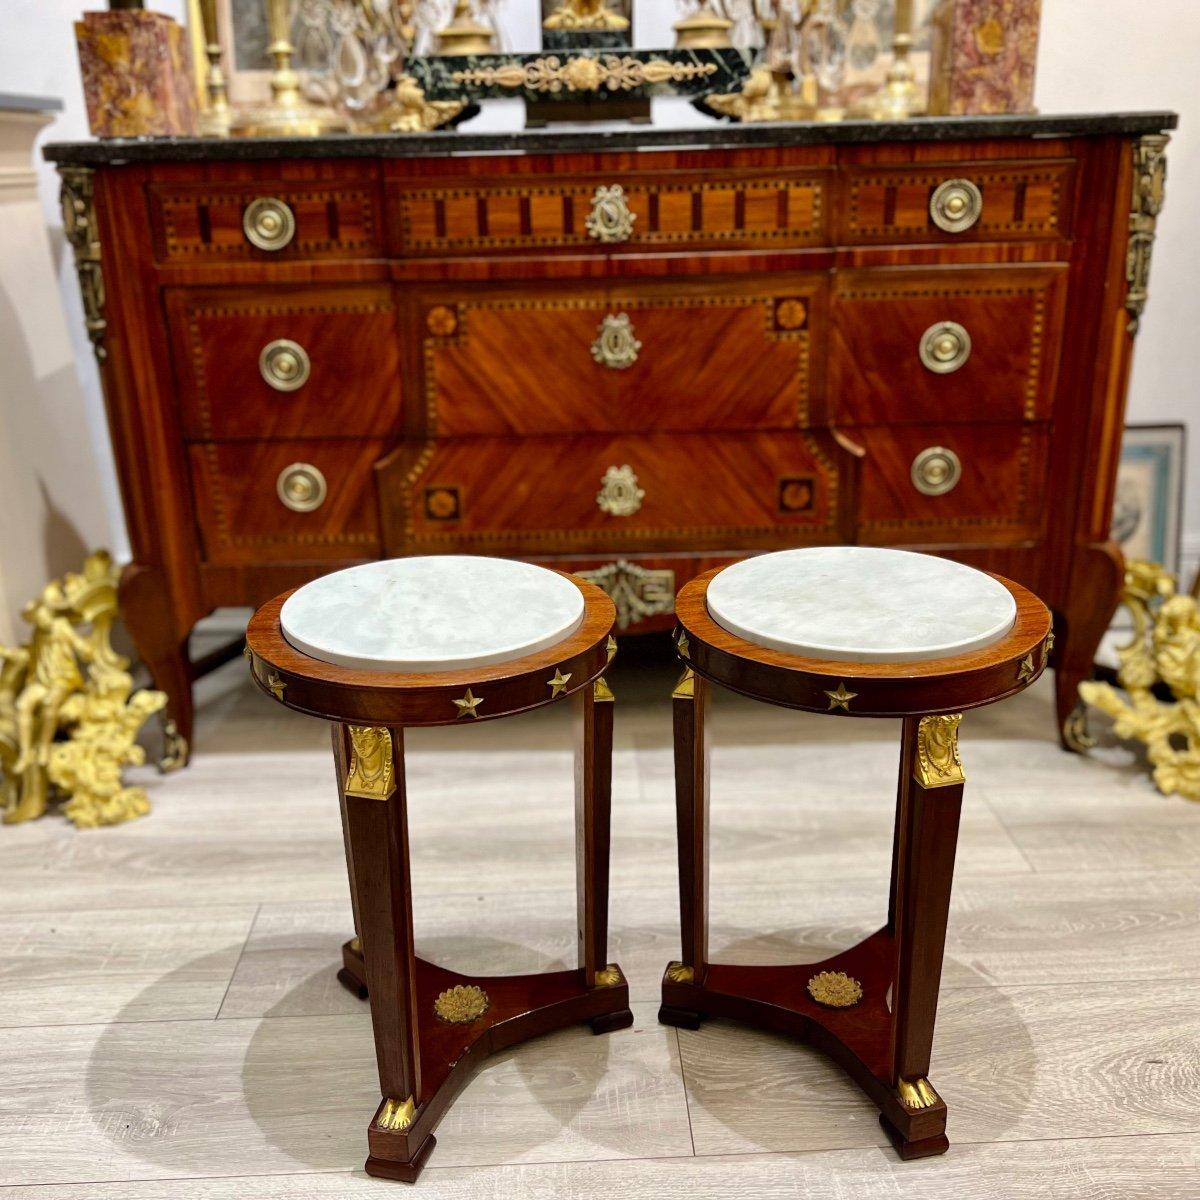 19th Century Empire Style Pair of Mahogany and Gilt Bronze Pedestals For Sale 4